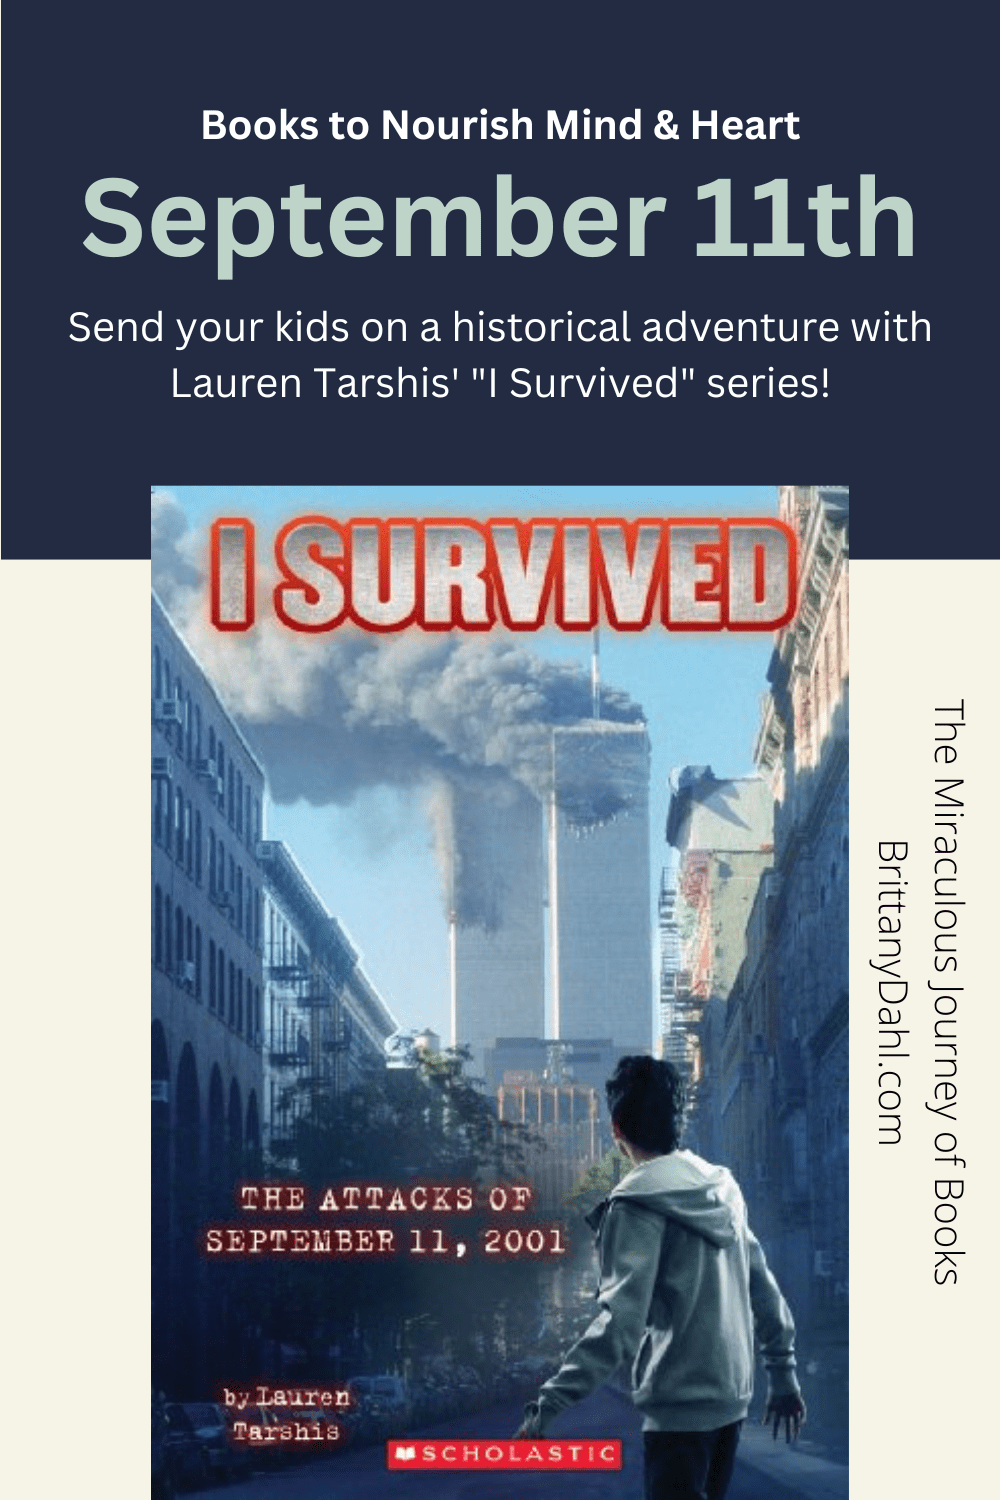 I Survived the Attacks of September 11, 2001 – Book Review